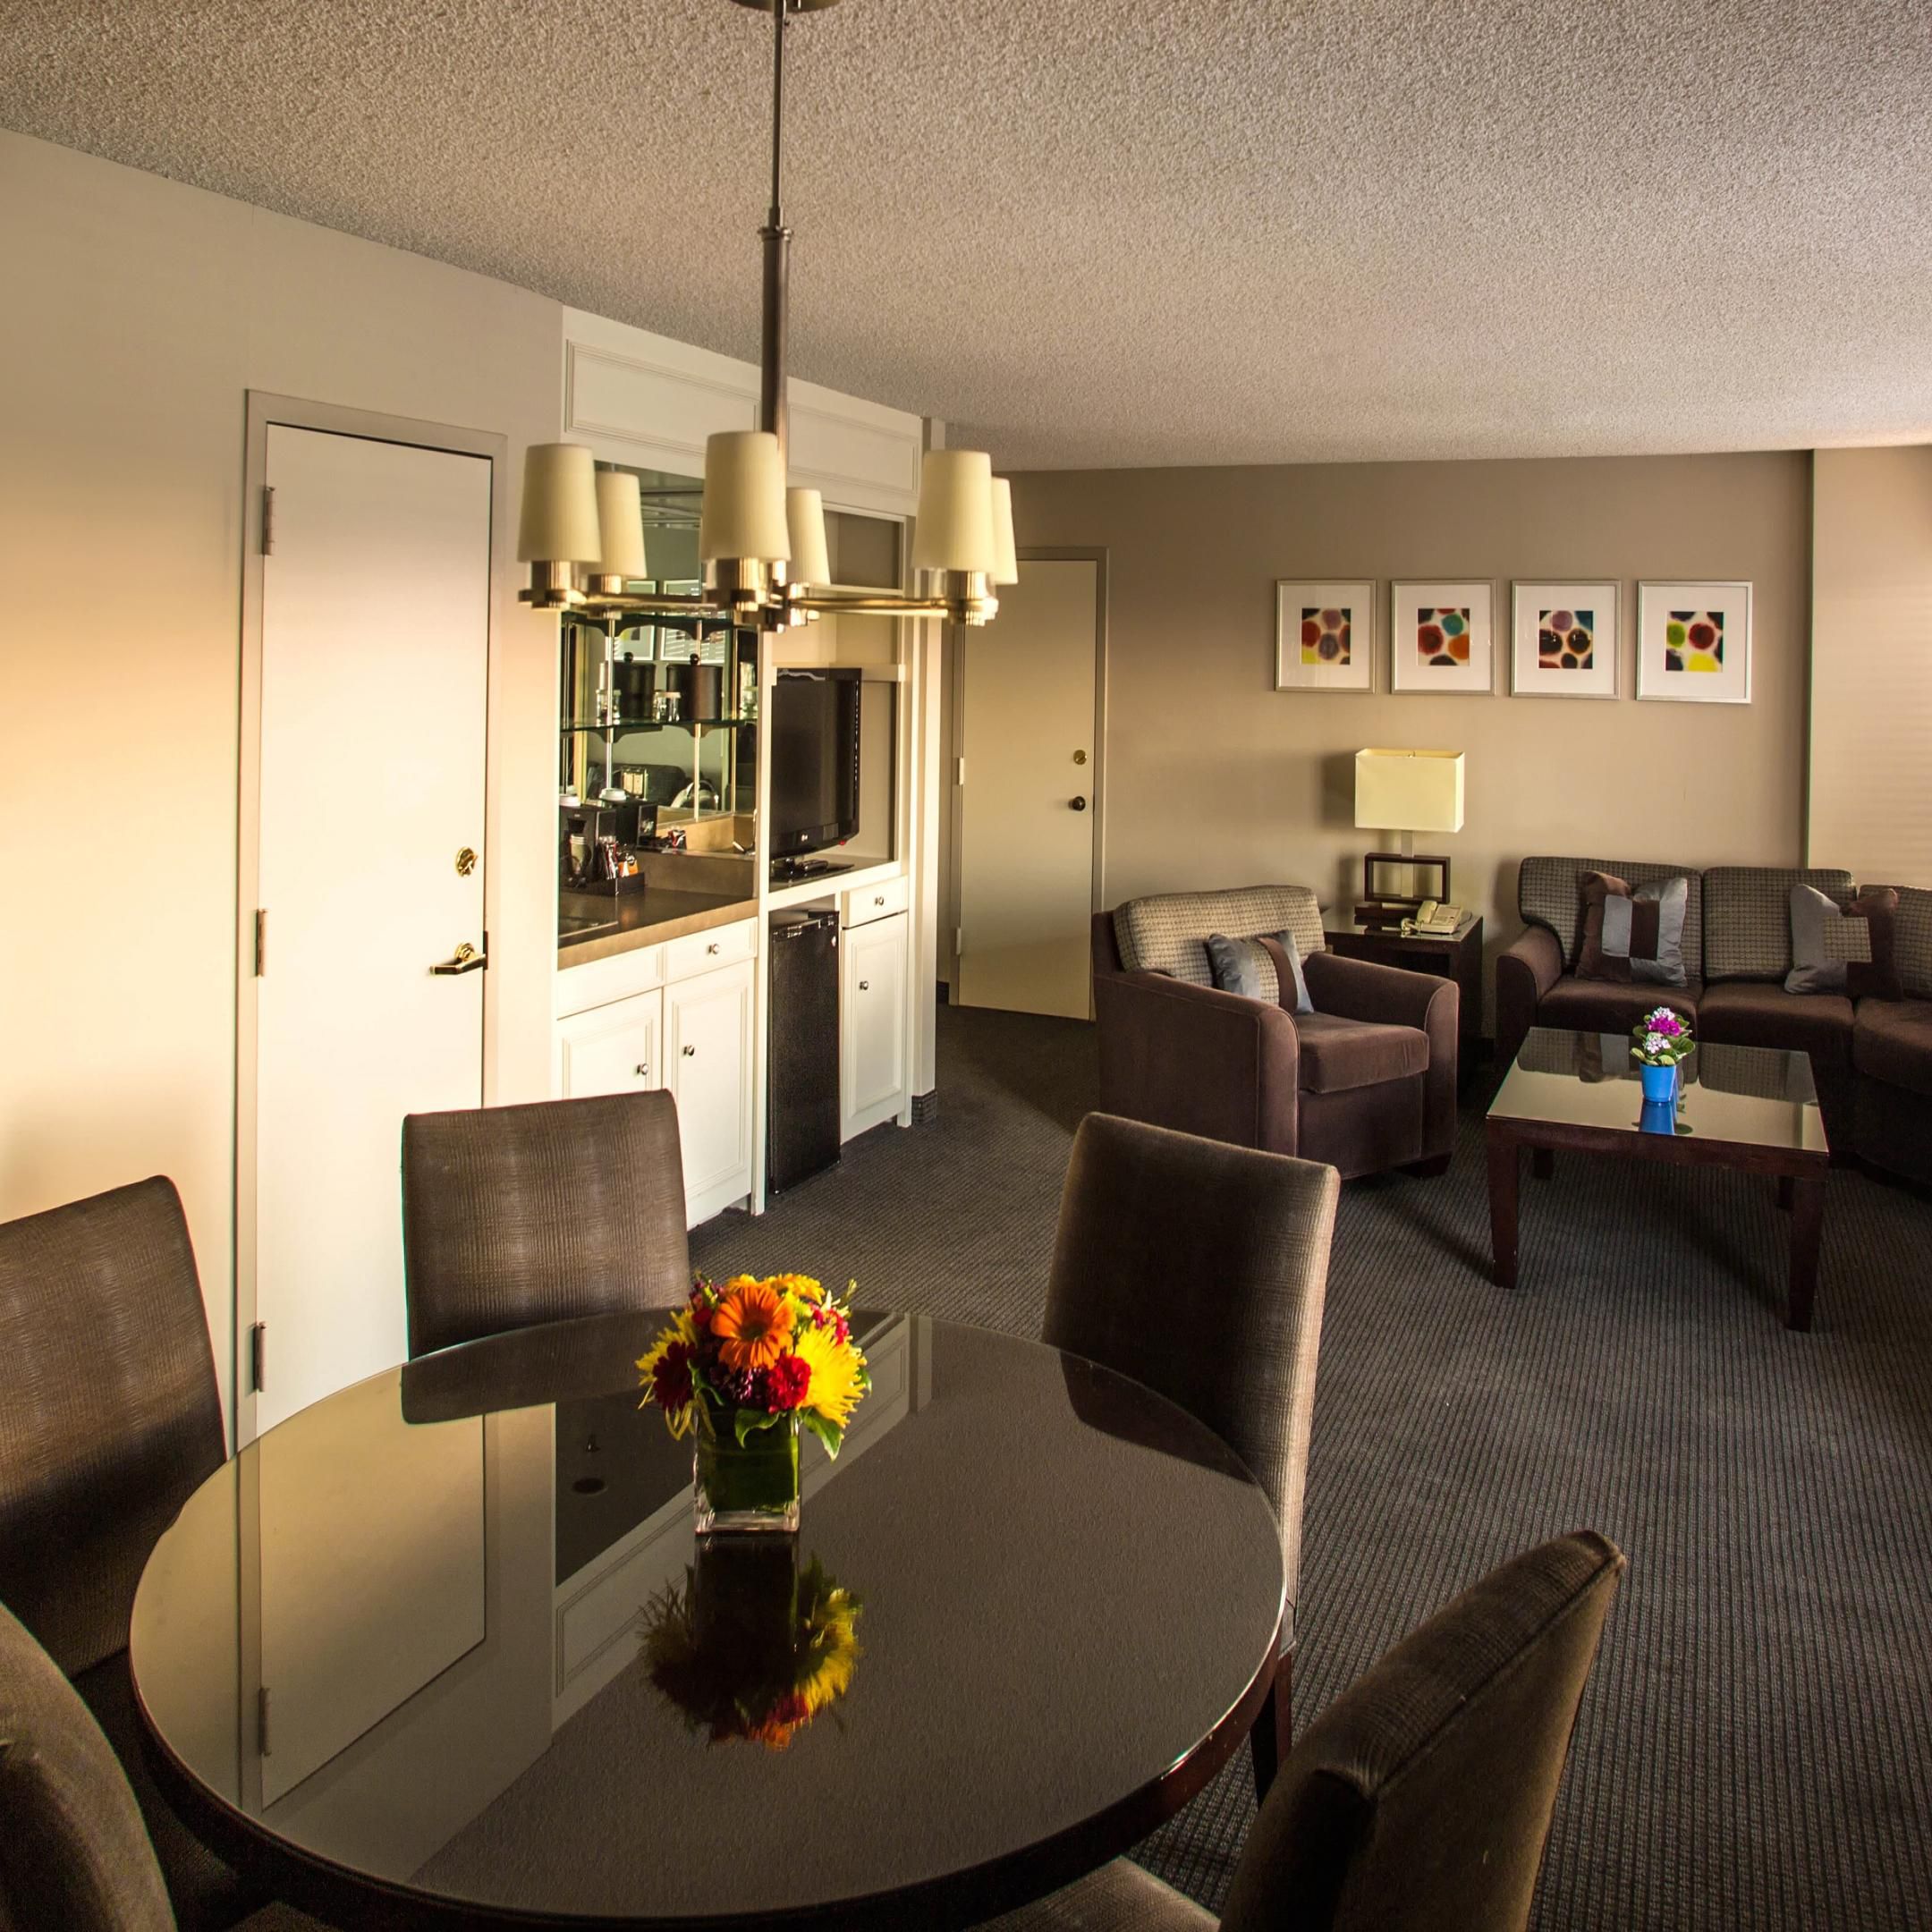 For extra space to stretch out and relax book our Parlor Suite